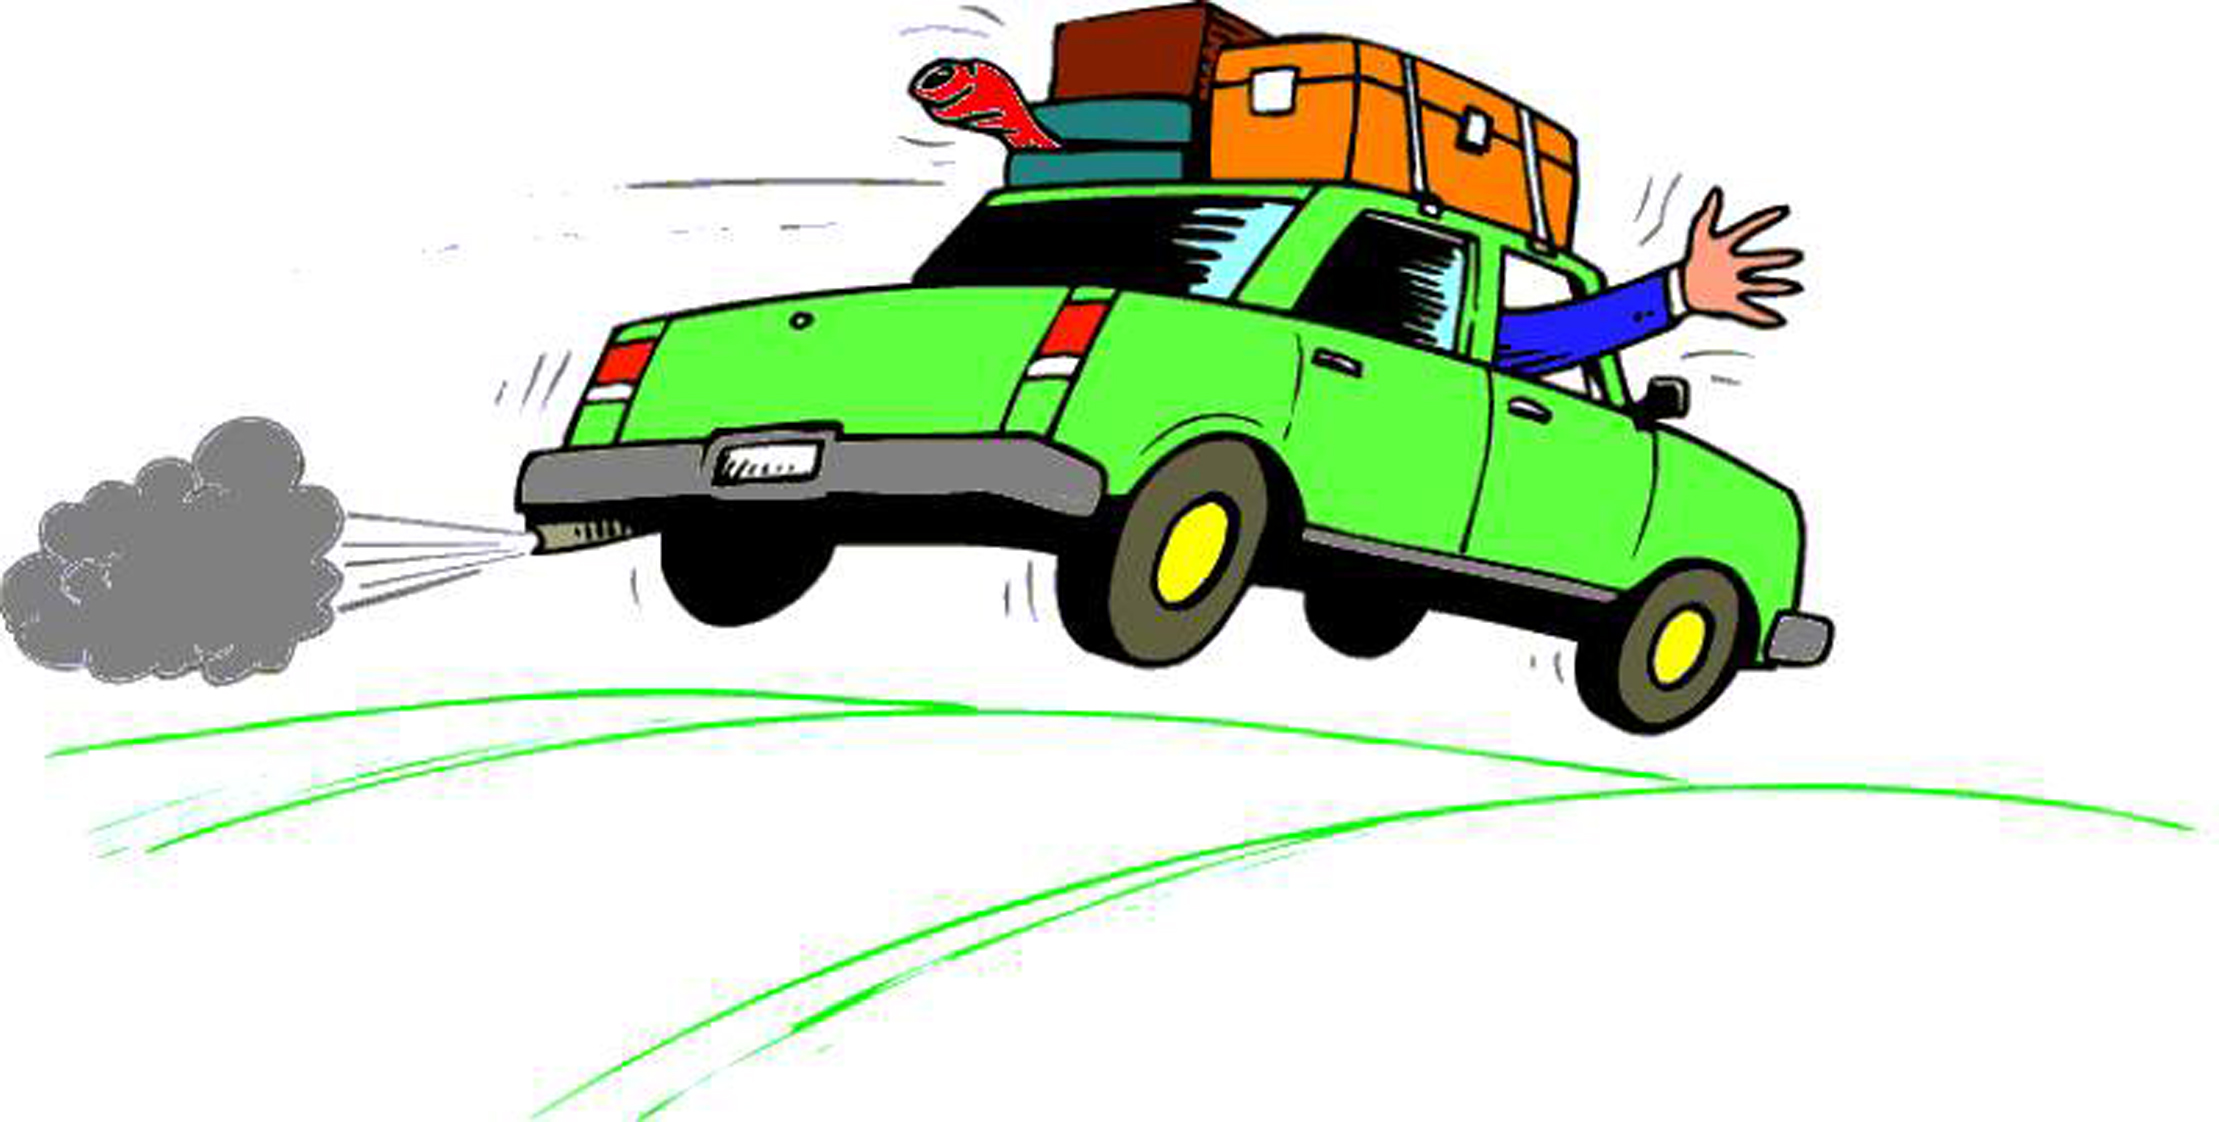 Family Car Trip   Clipart Panda   Free Clipart Images